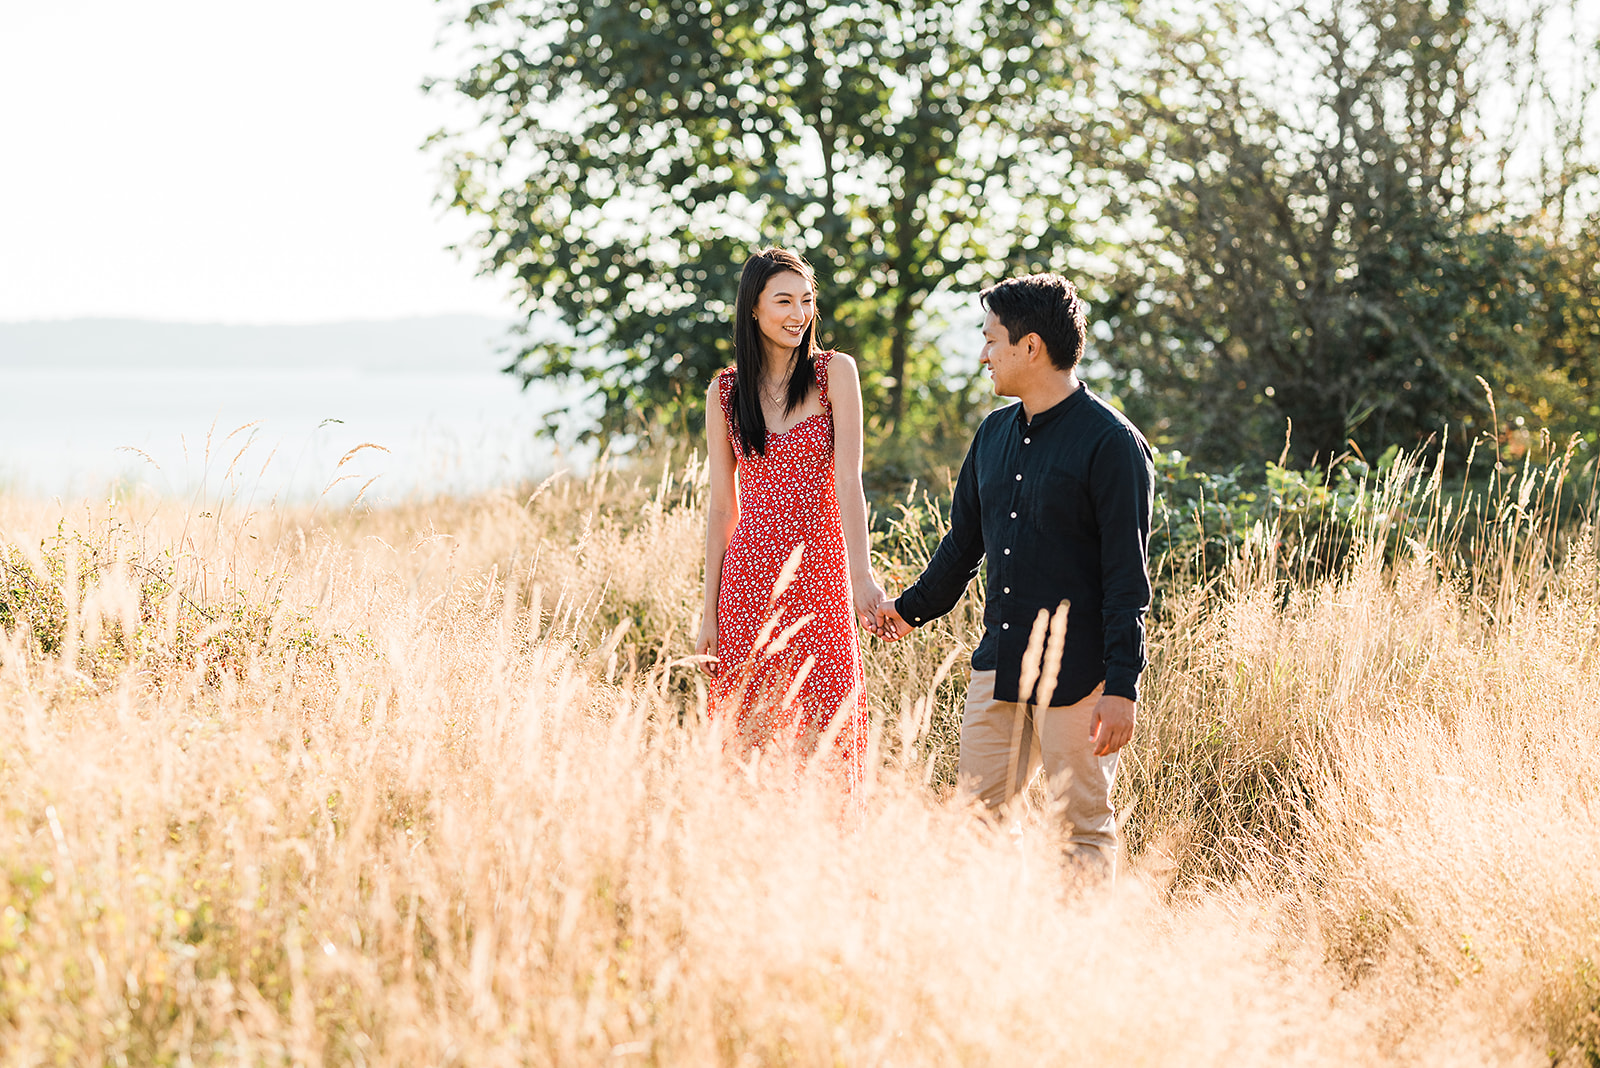 Outdoorsy Seattle Engagement Photos, Discovery Park Engagement Photos, Captured by Candace Photography, Seattle Engagement Photographer